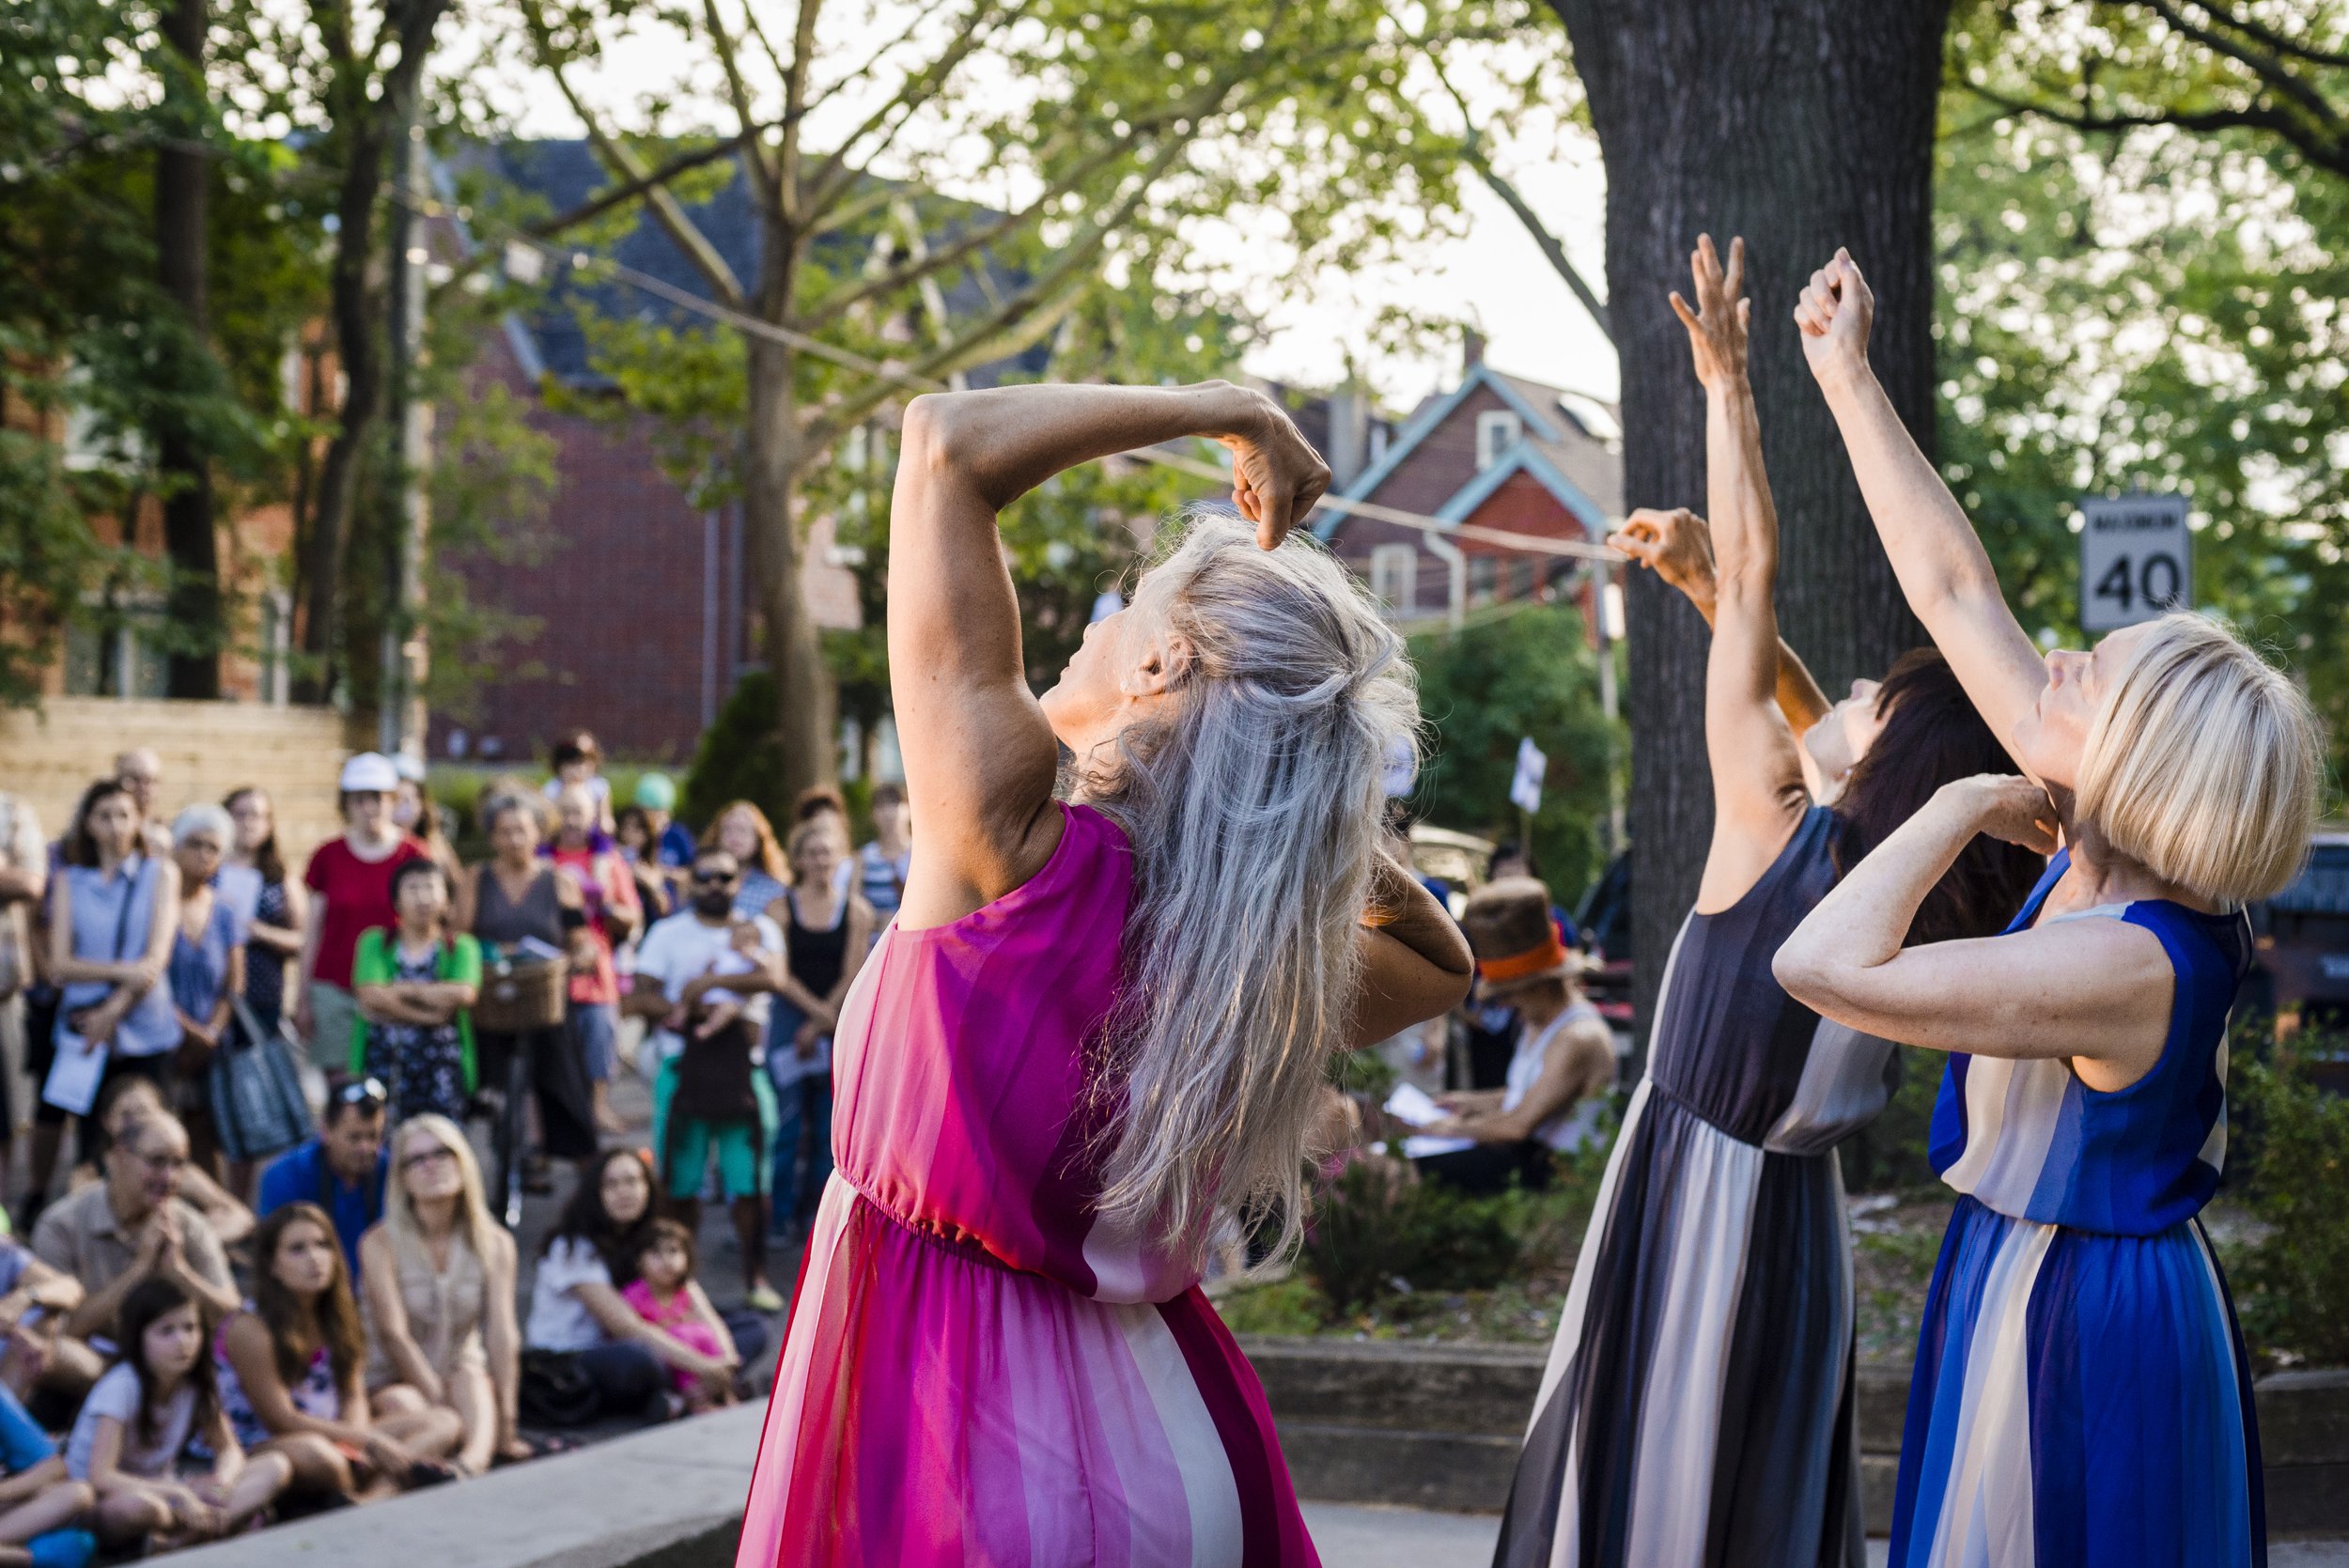 Trio of women, each reaching for the sky in front of a engaged audience